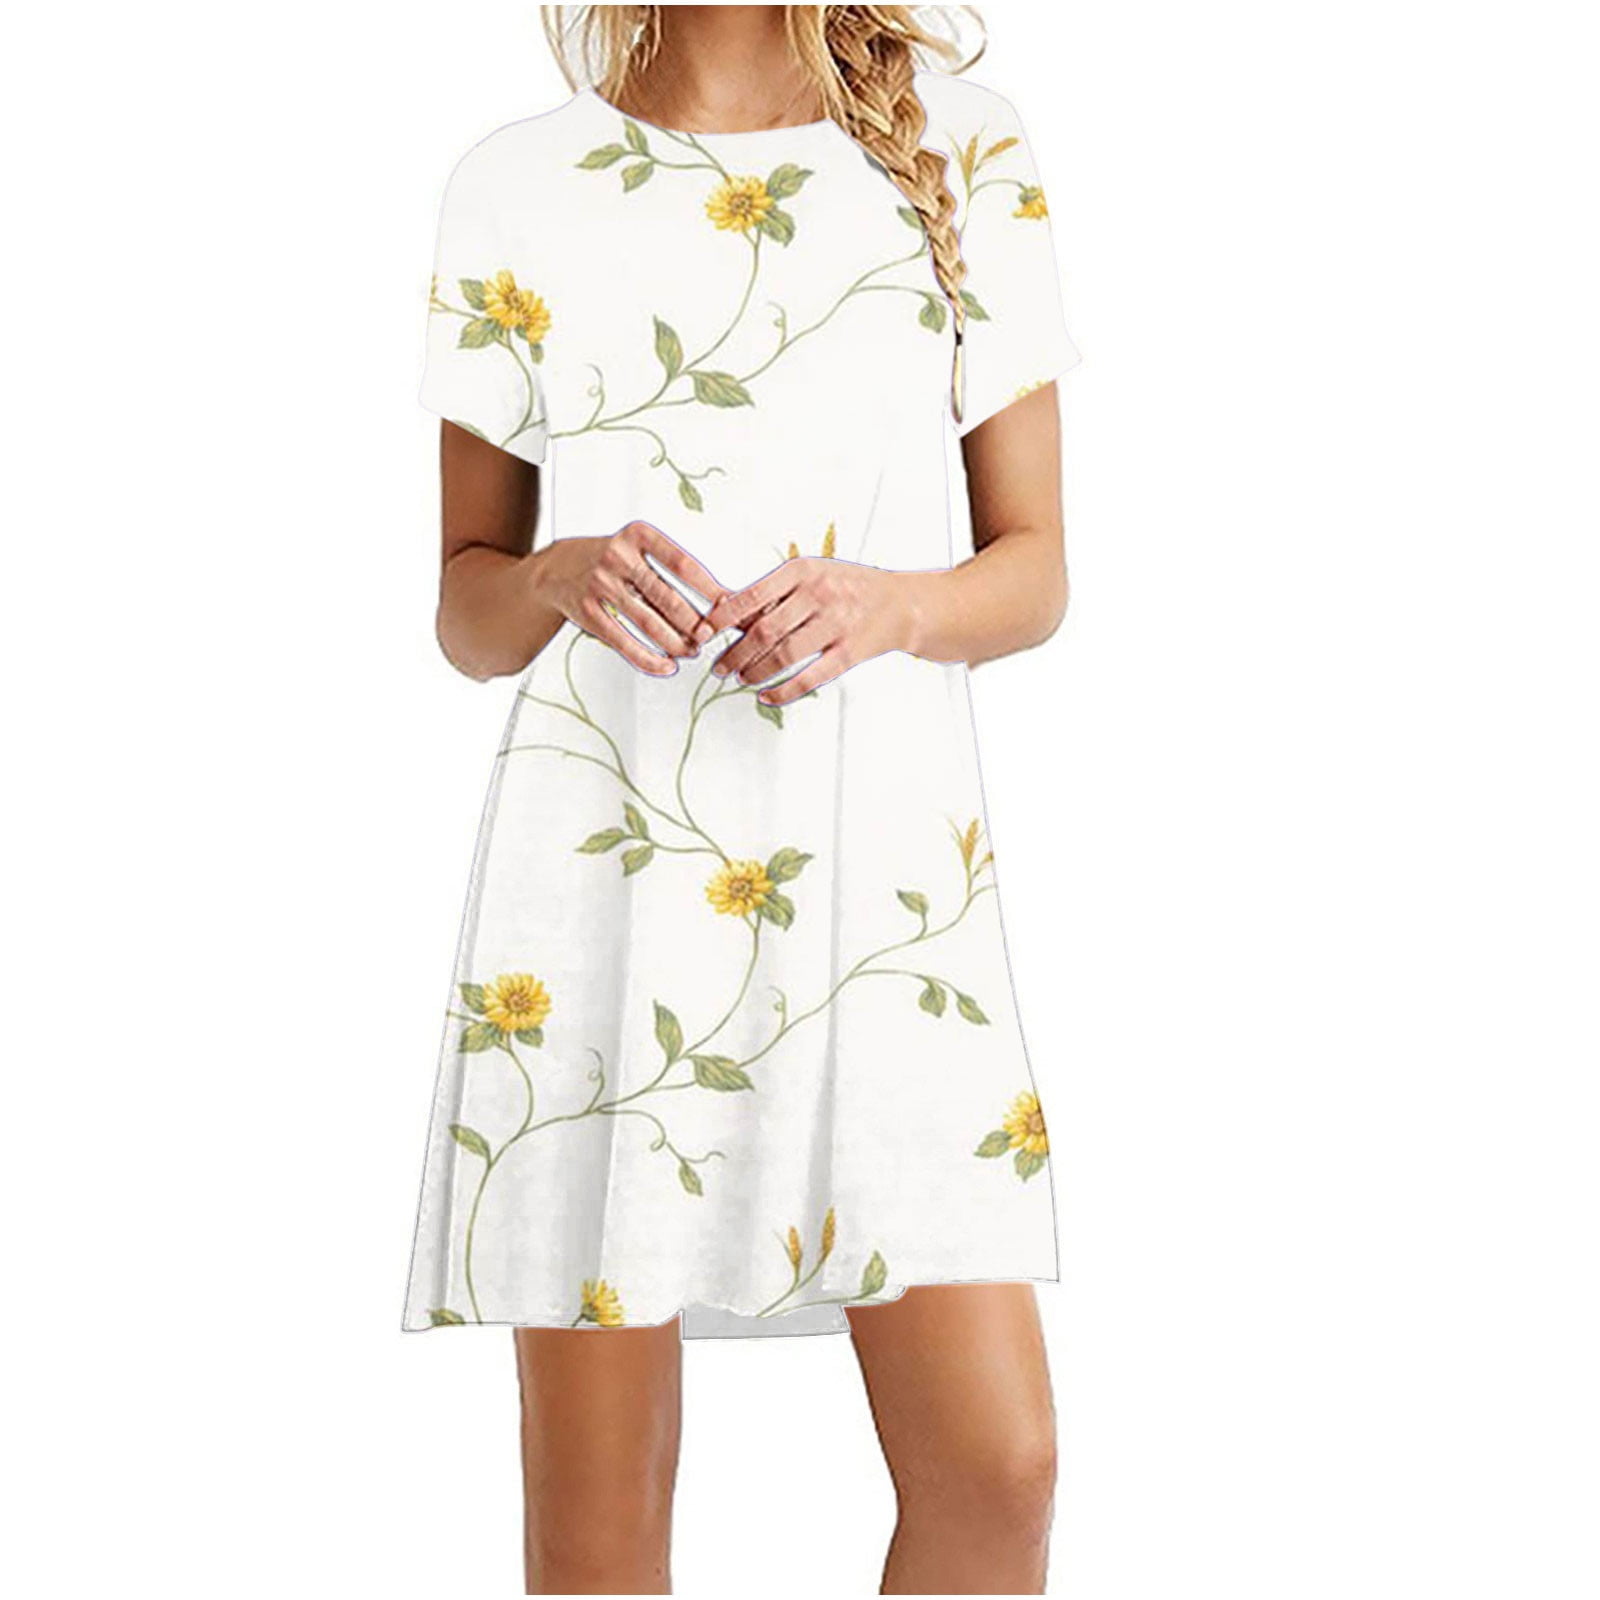 Gosuguu Women's Casual Plain Loose Short Sleeve Loose Dress Floral Print  Sunflower Print Dress Overstock Items Clearance All Best Clearance Deals  Today #1 